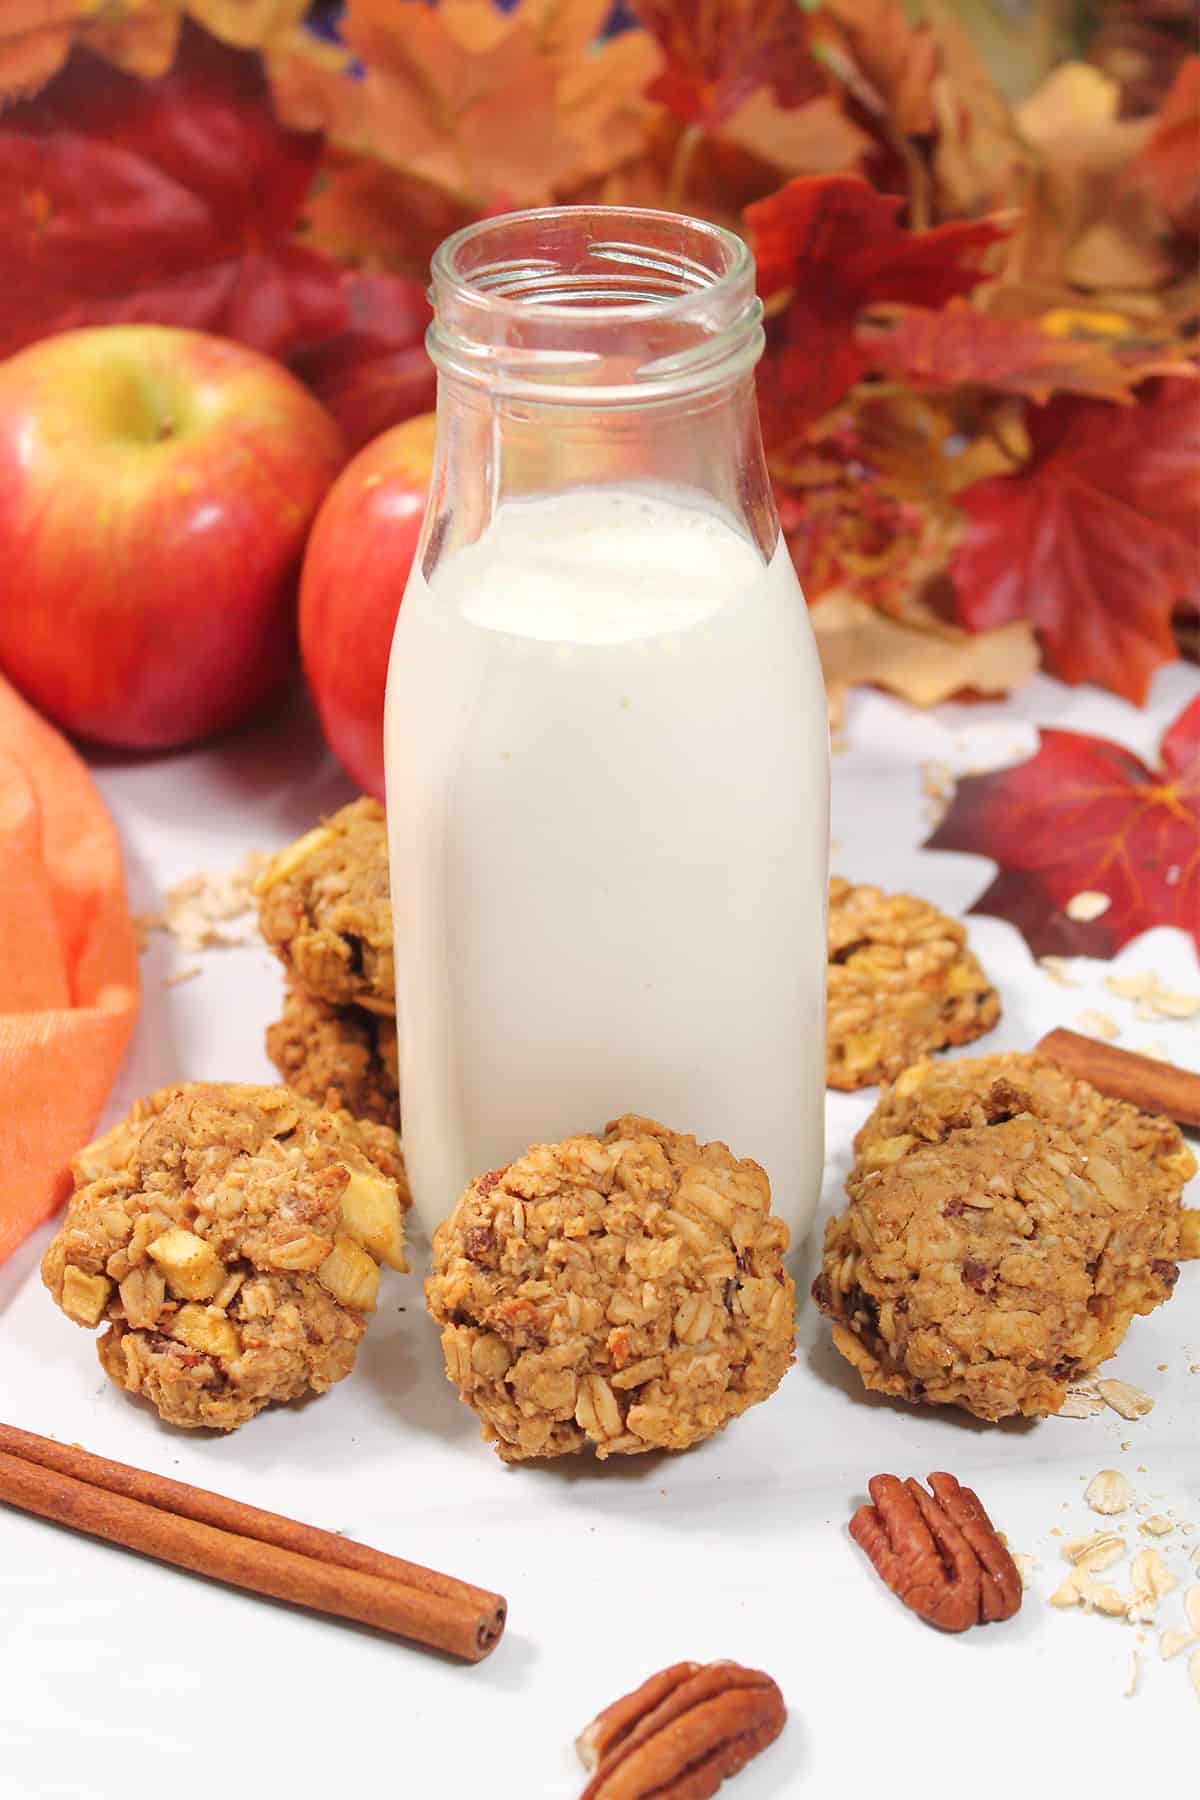 Maple oatmeal cookies with milk bottle.